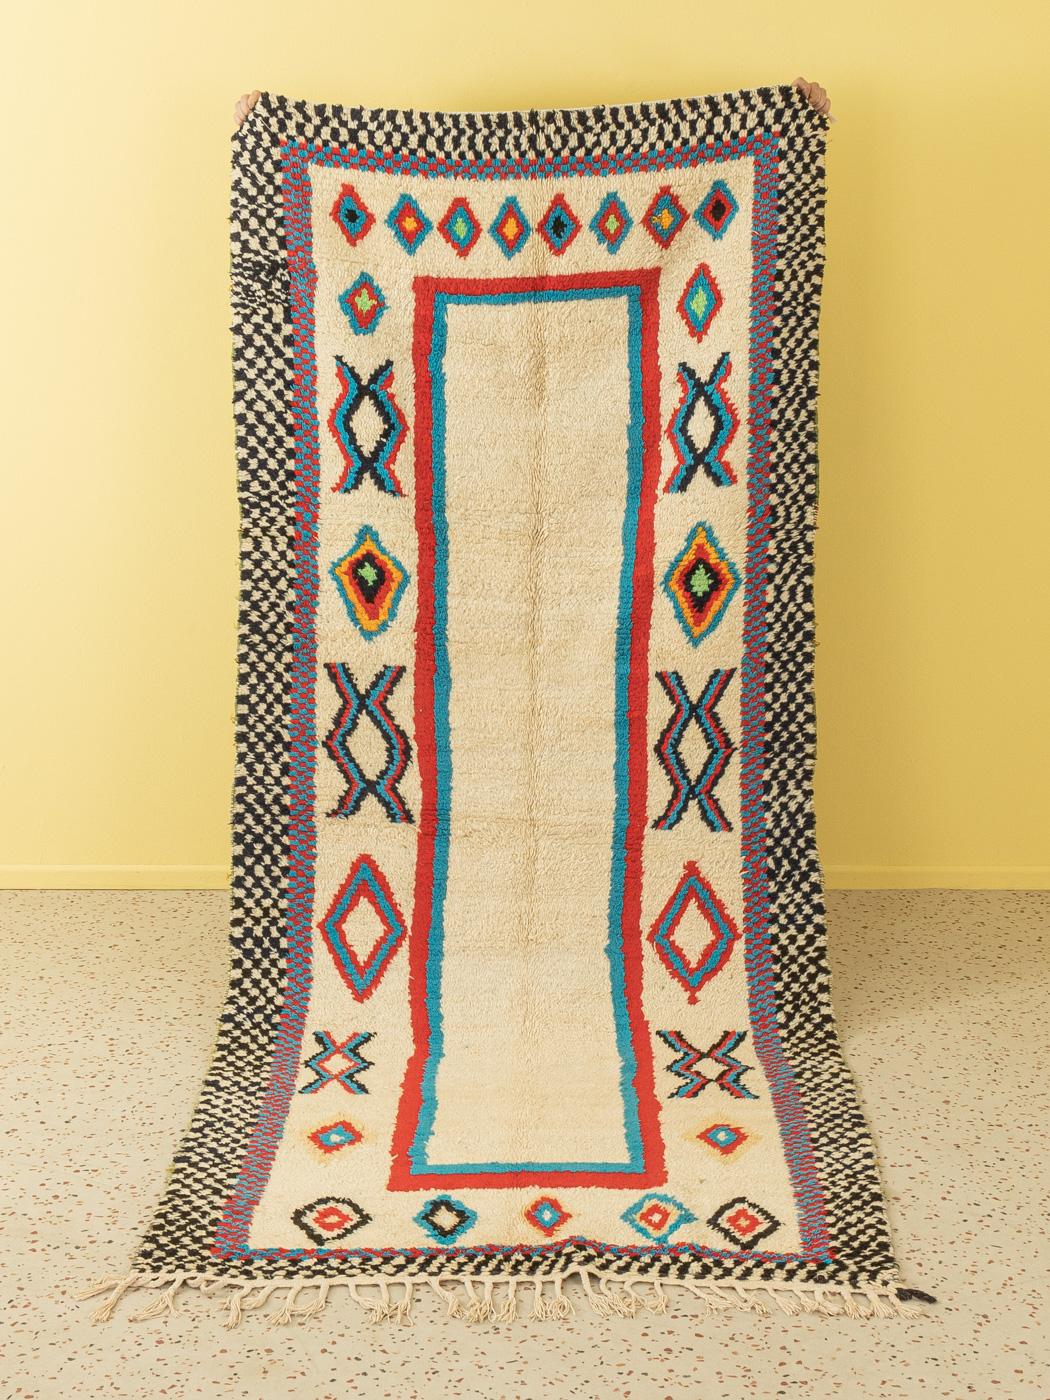 This Vintage Azilal is a 100 % wool rug – soft and comfortable underfoot. Our Berber rugs are handmade, one knot at a time. Each of our Berber rugs is a long-lasting one-of-a-kind piece, created in a sustainable manner with local wool.

Quality